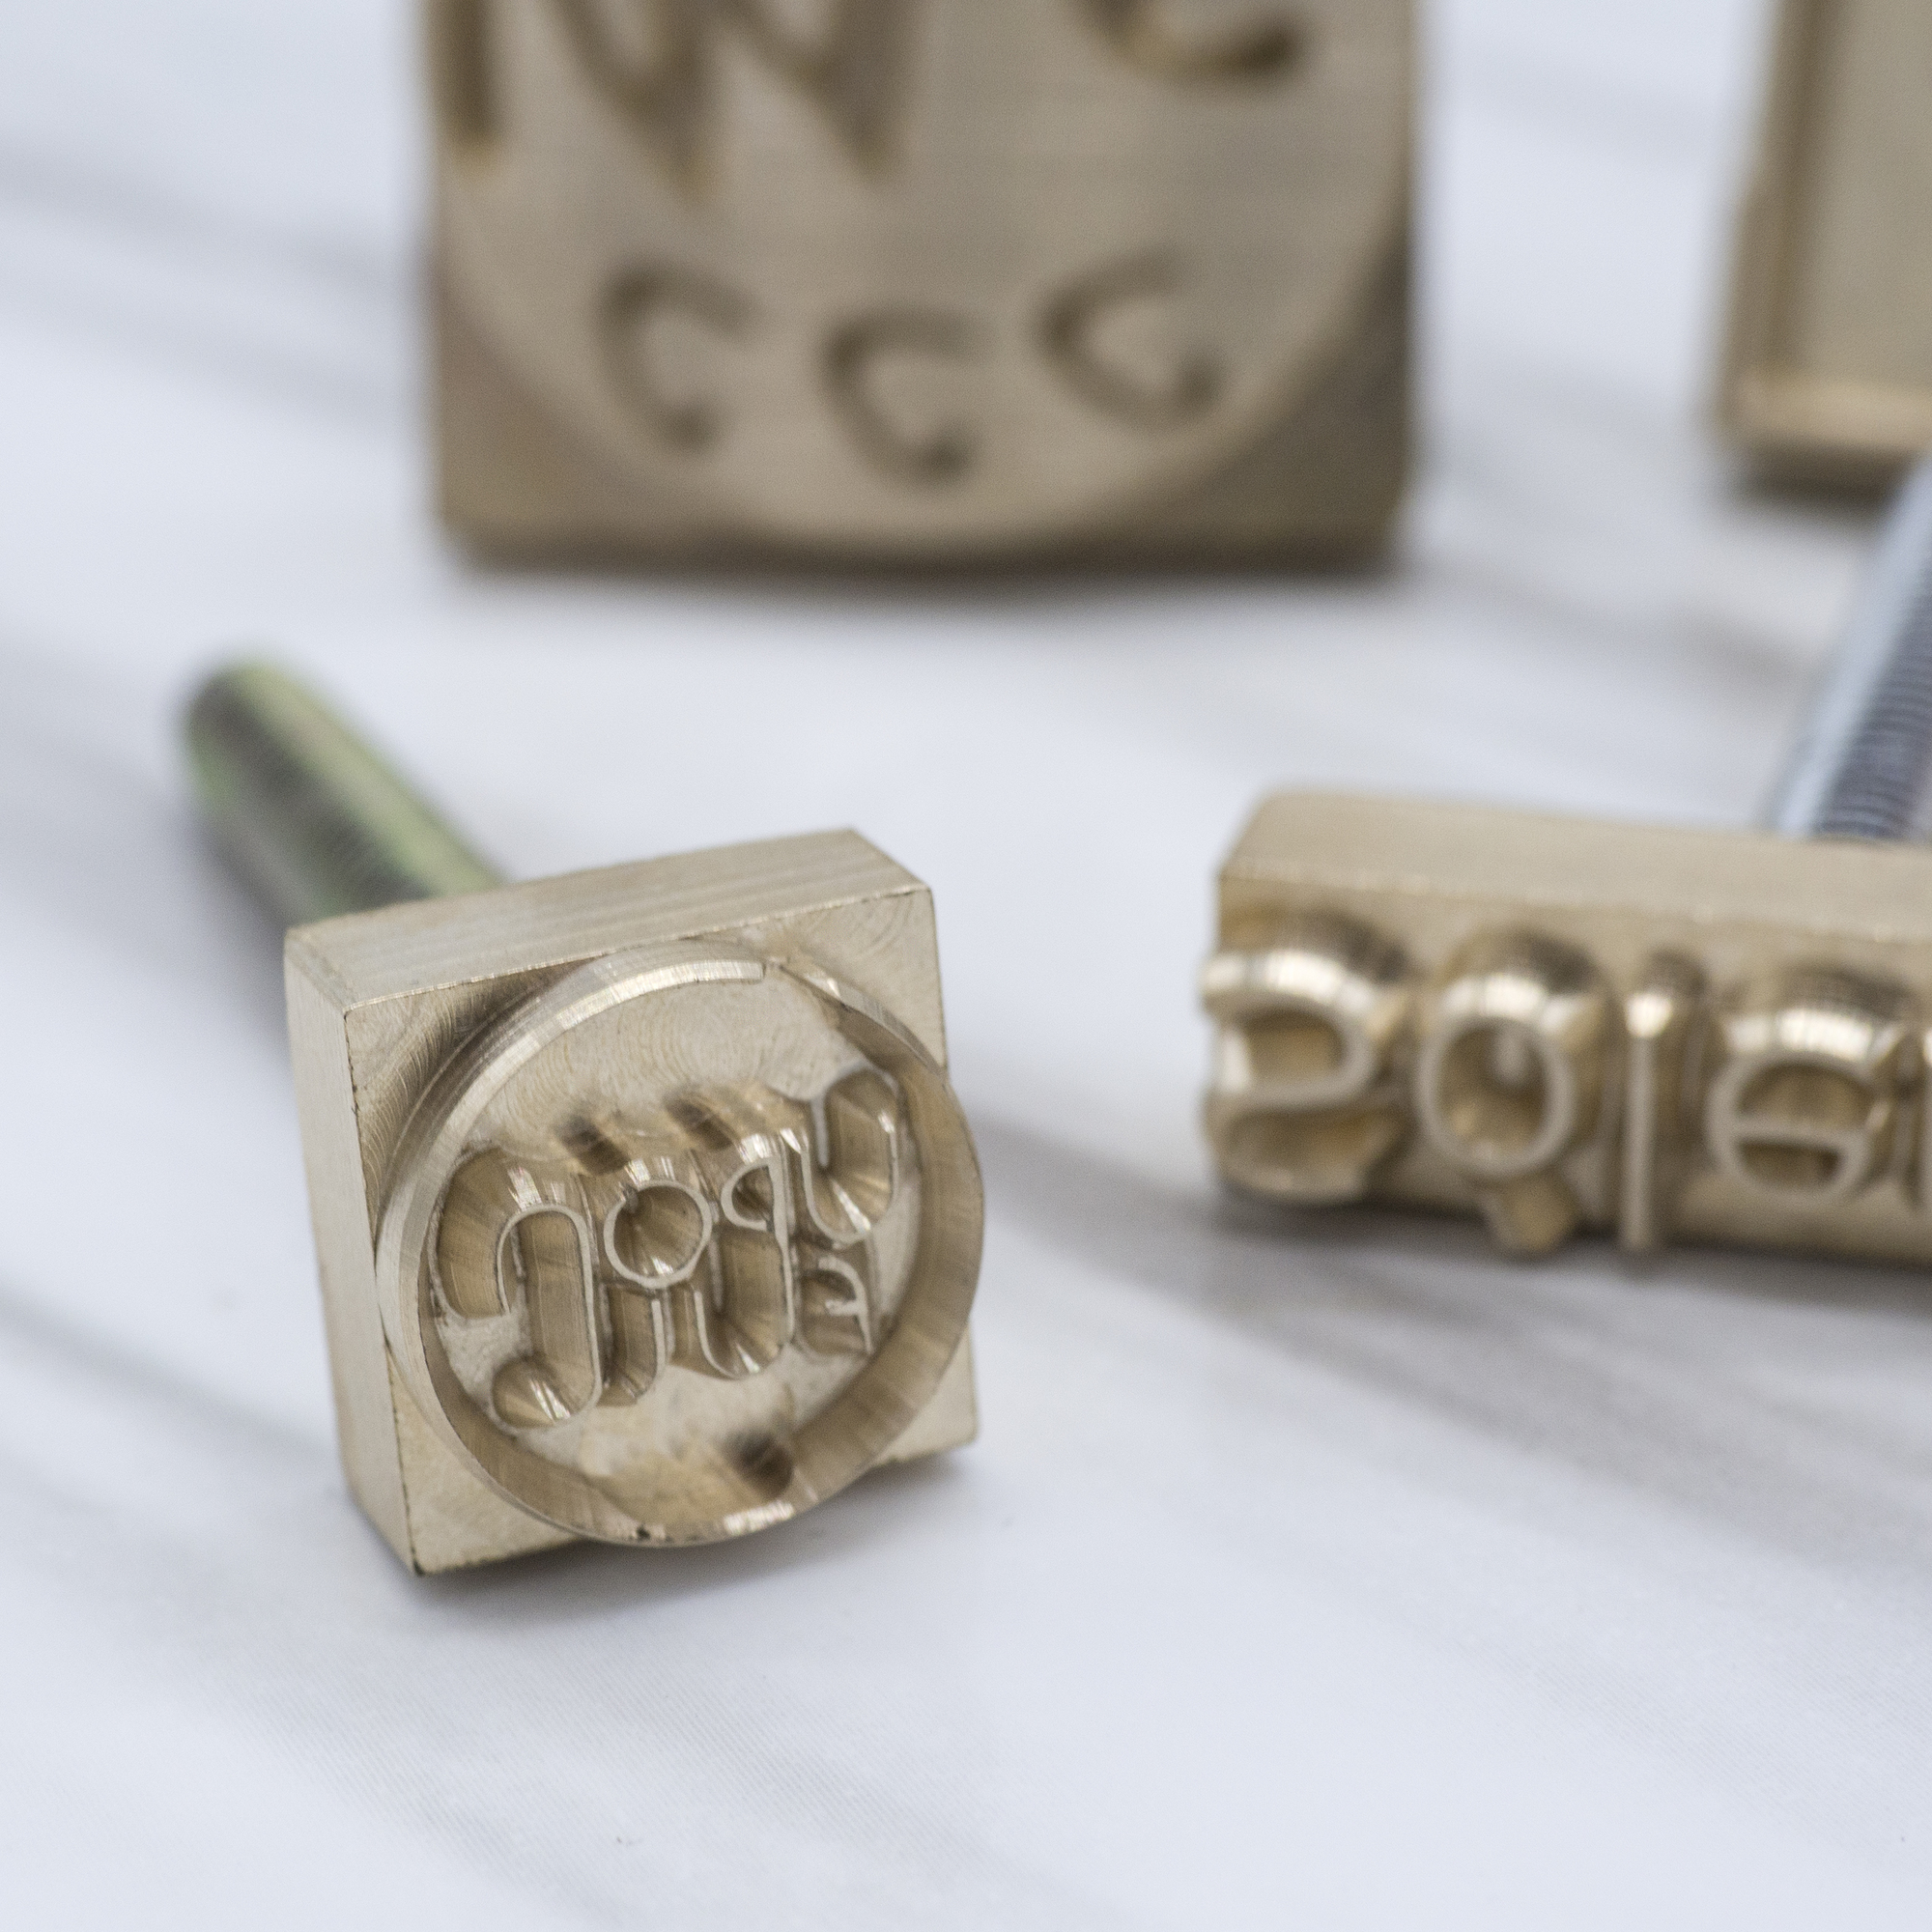 Custom Brass Stamps & Brass Die for Wood Branding, Leather Marking, & –  Stamp Yours